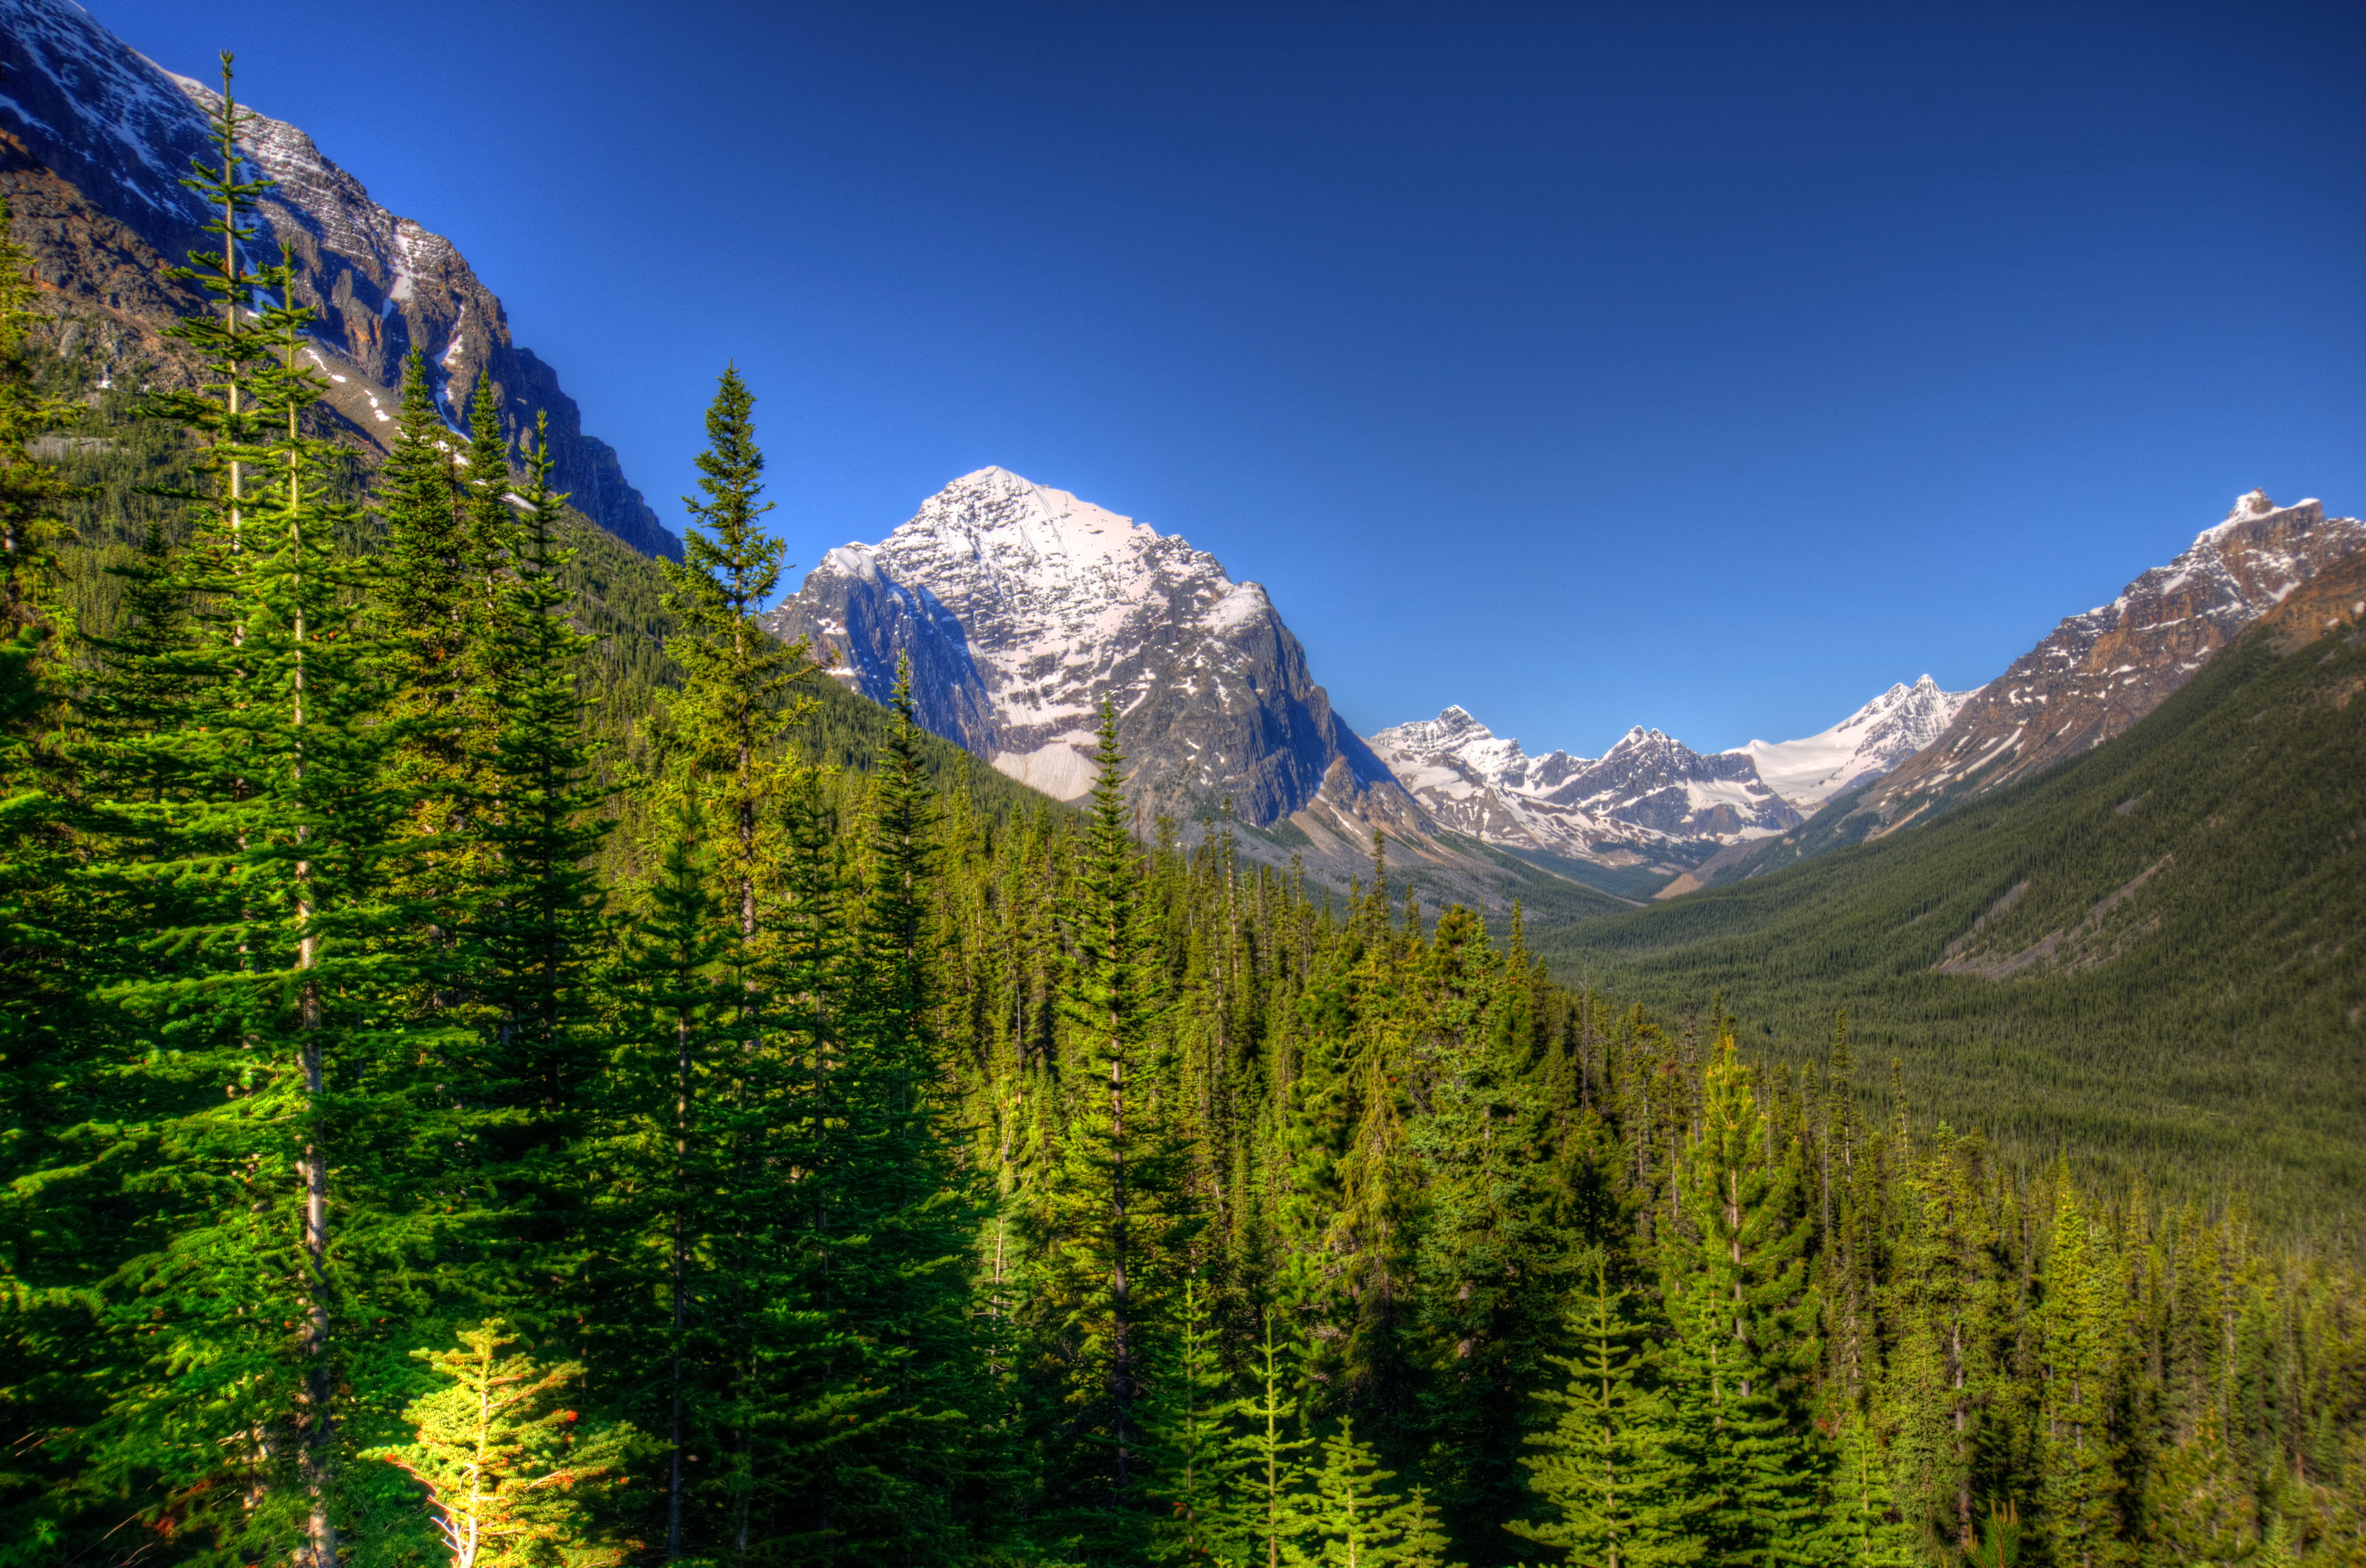 parks, Canada, Forests, Scenery, Mountains, Jasper, Trees, Fir, Nature, Trees, Hdr Wallpaper